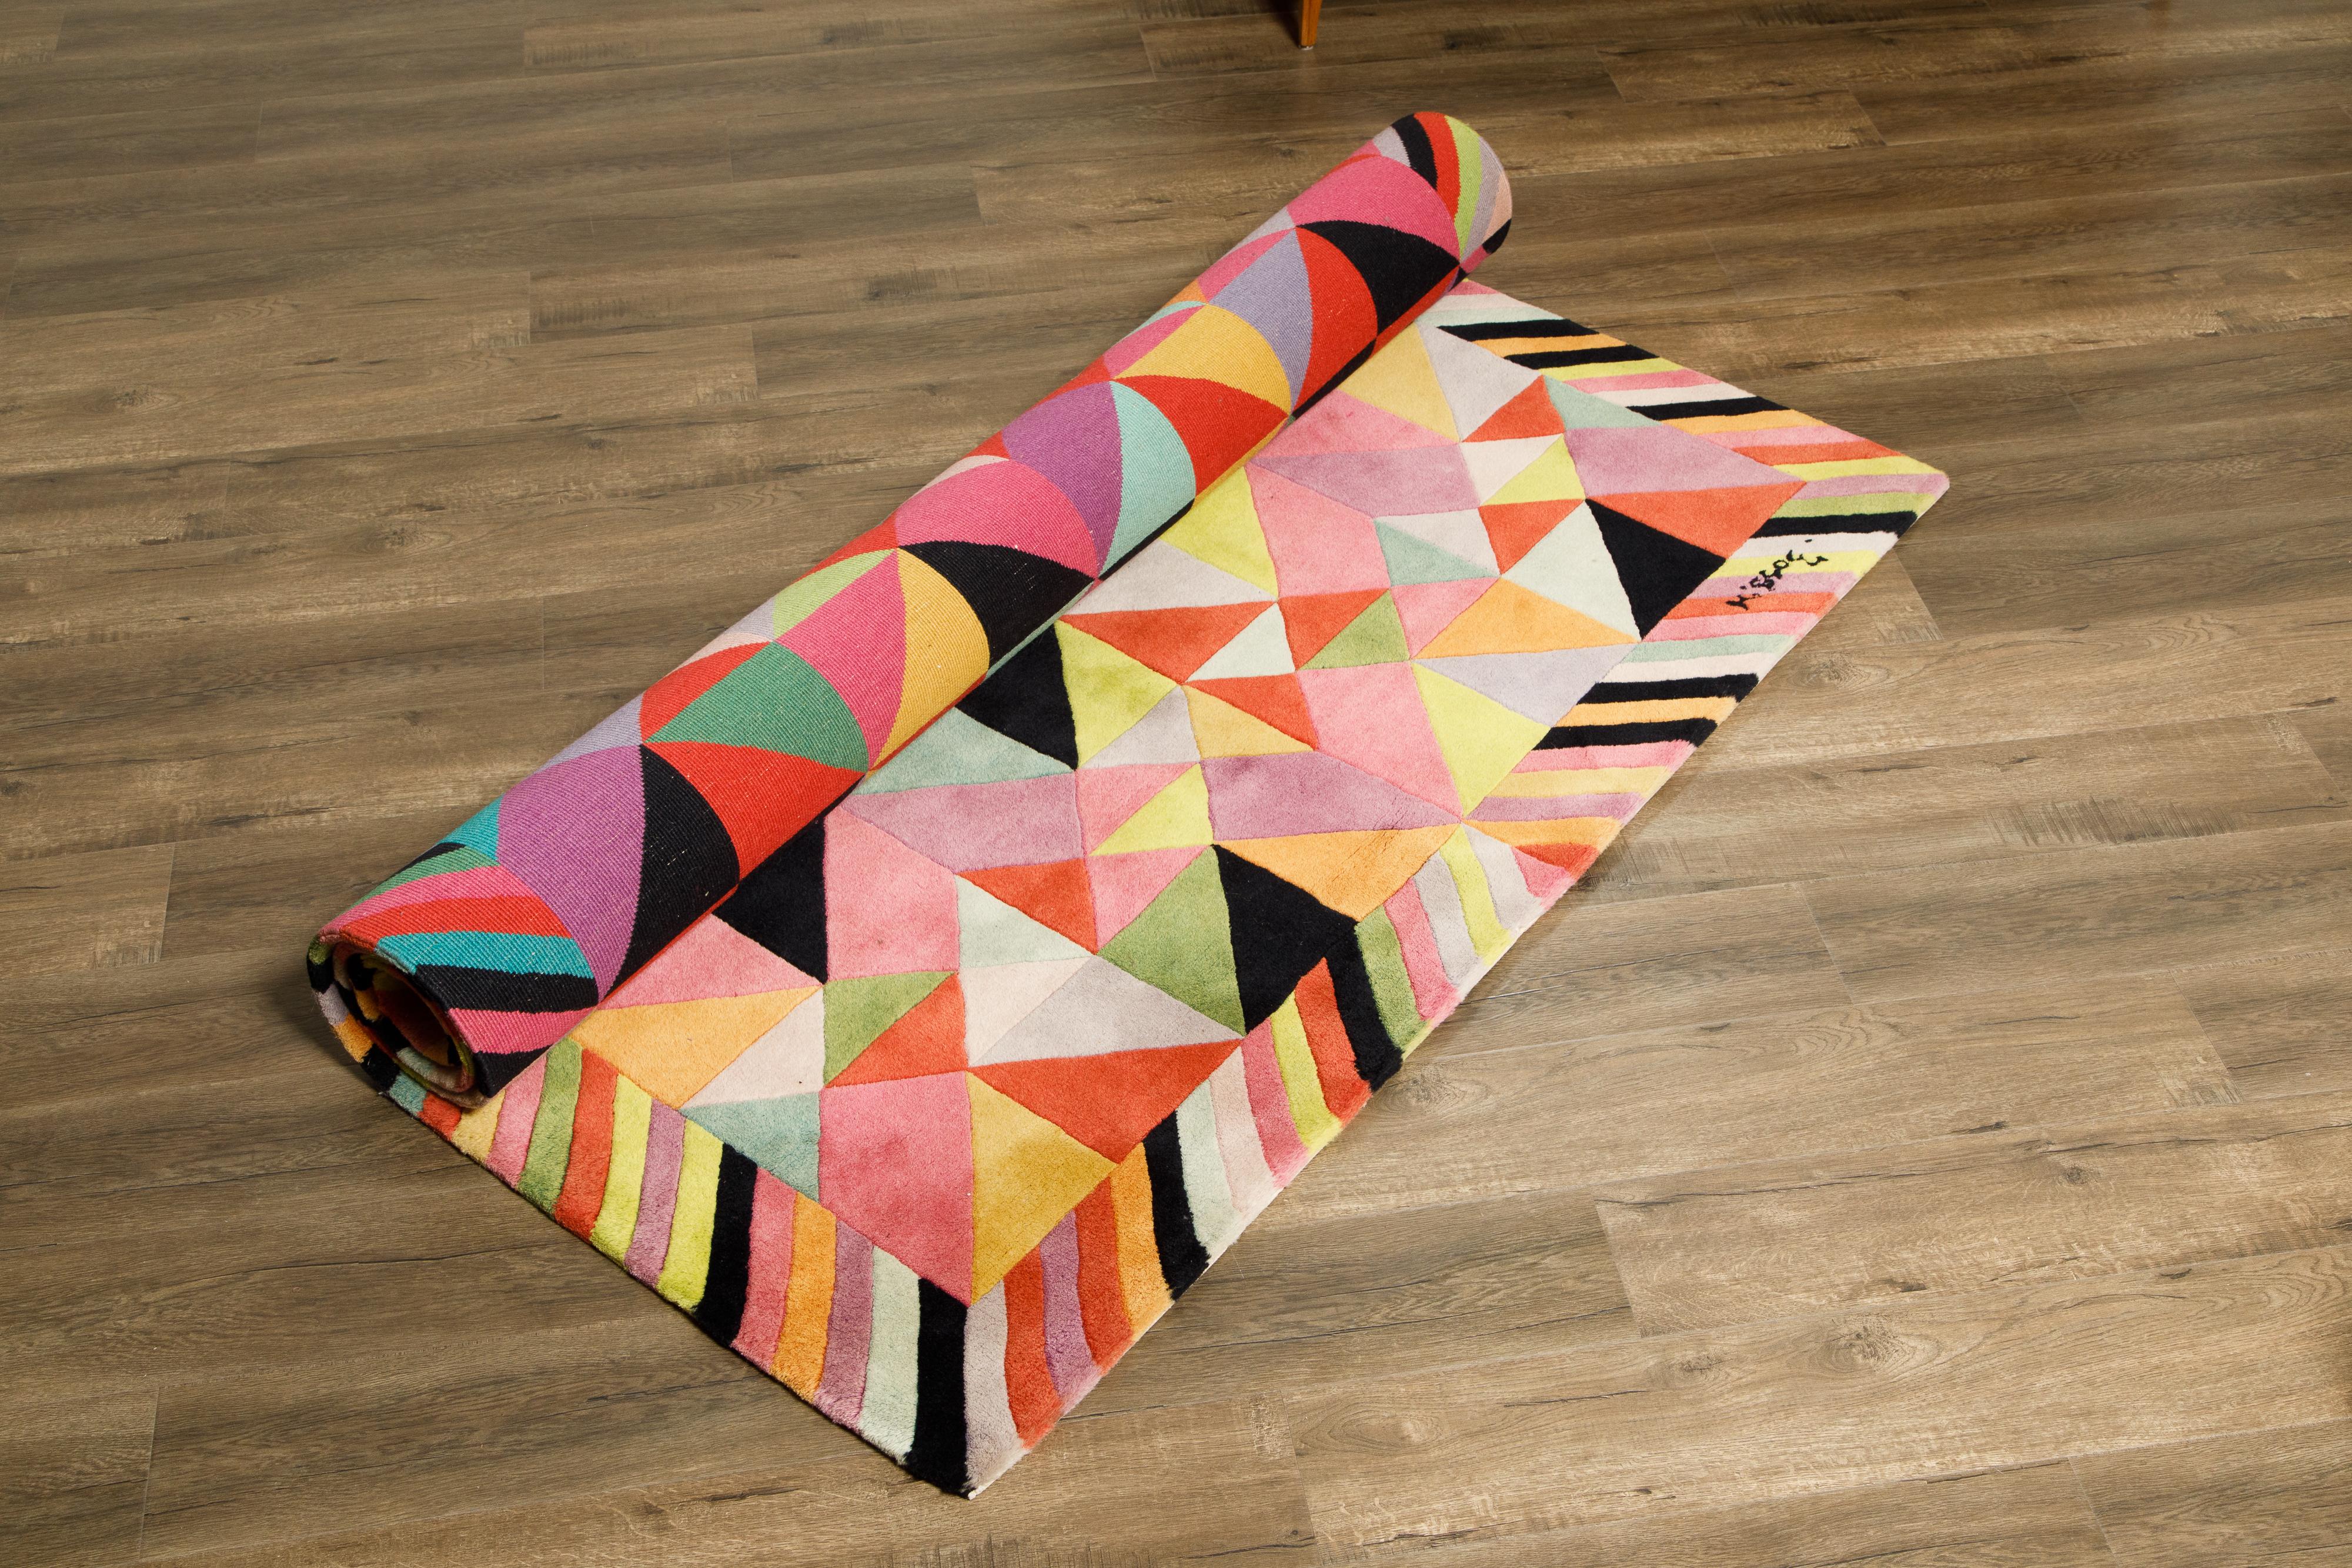 Attention interior designers, this is the large rug you need for that high-profile cover-worthy room you're working on. This signed Missoni rug is from the 1980s and in an oh-so-on-trend Post-Modern design featuring classic Missoni colors in a